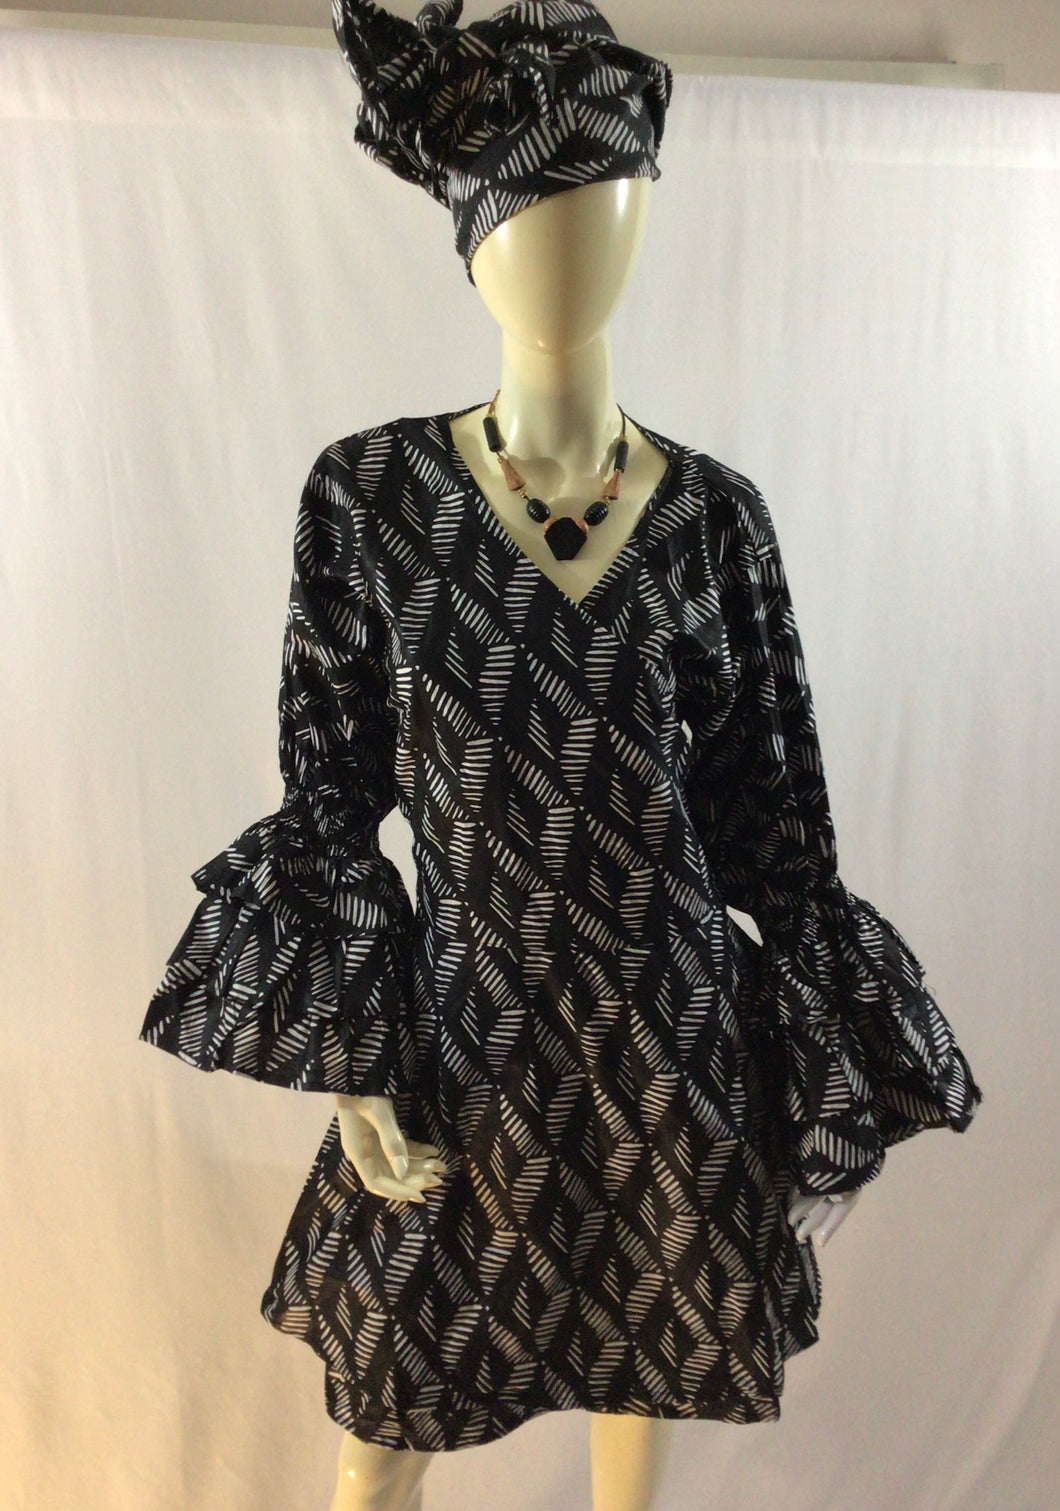 African Print Black & White Bell Sleeve Wrap Dress with Head Piece Scarf